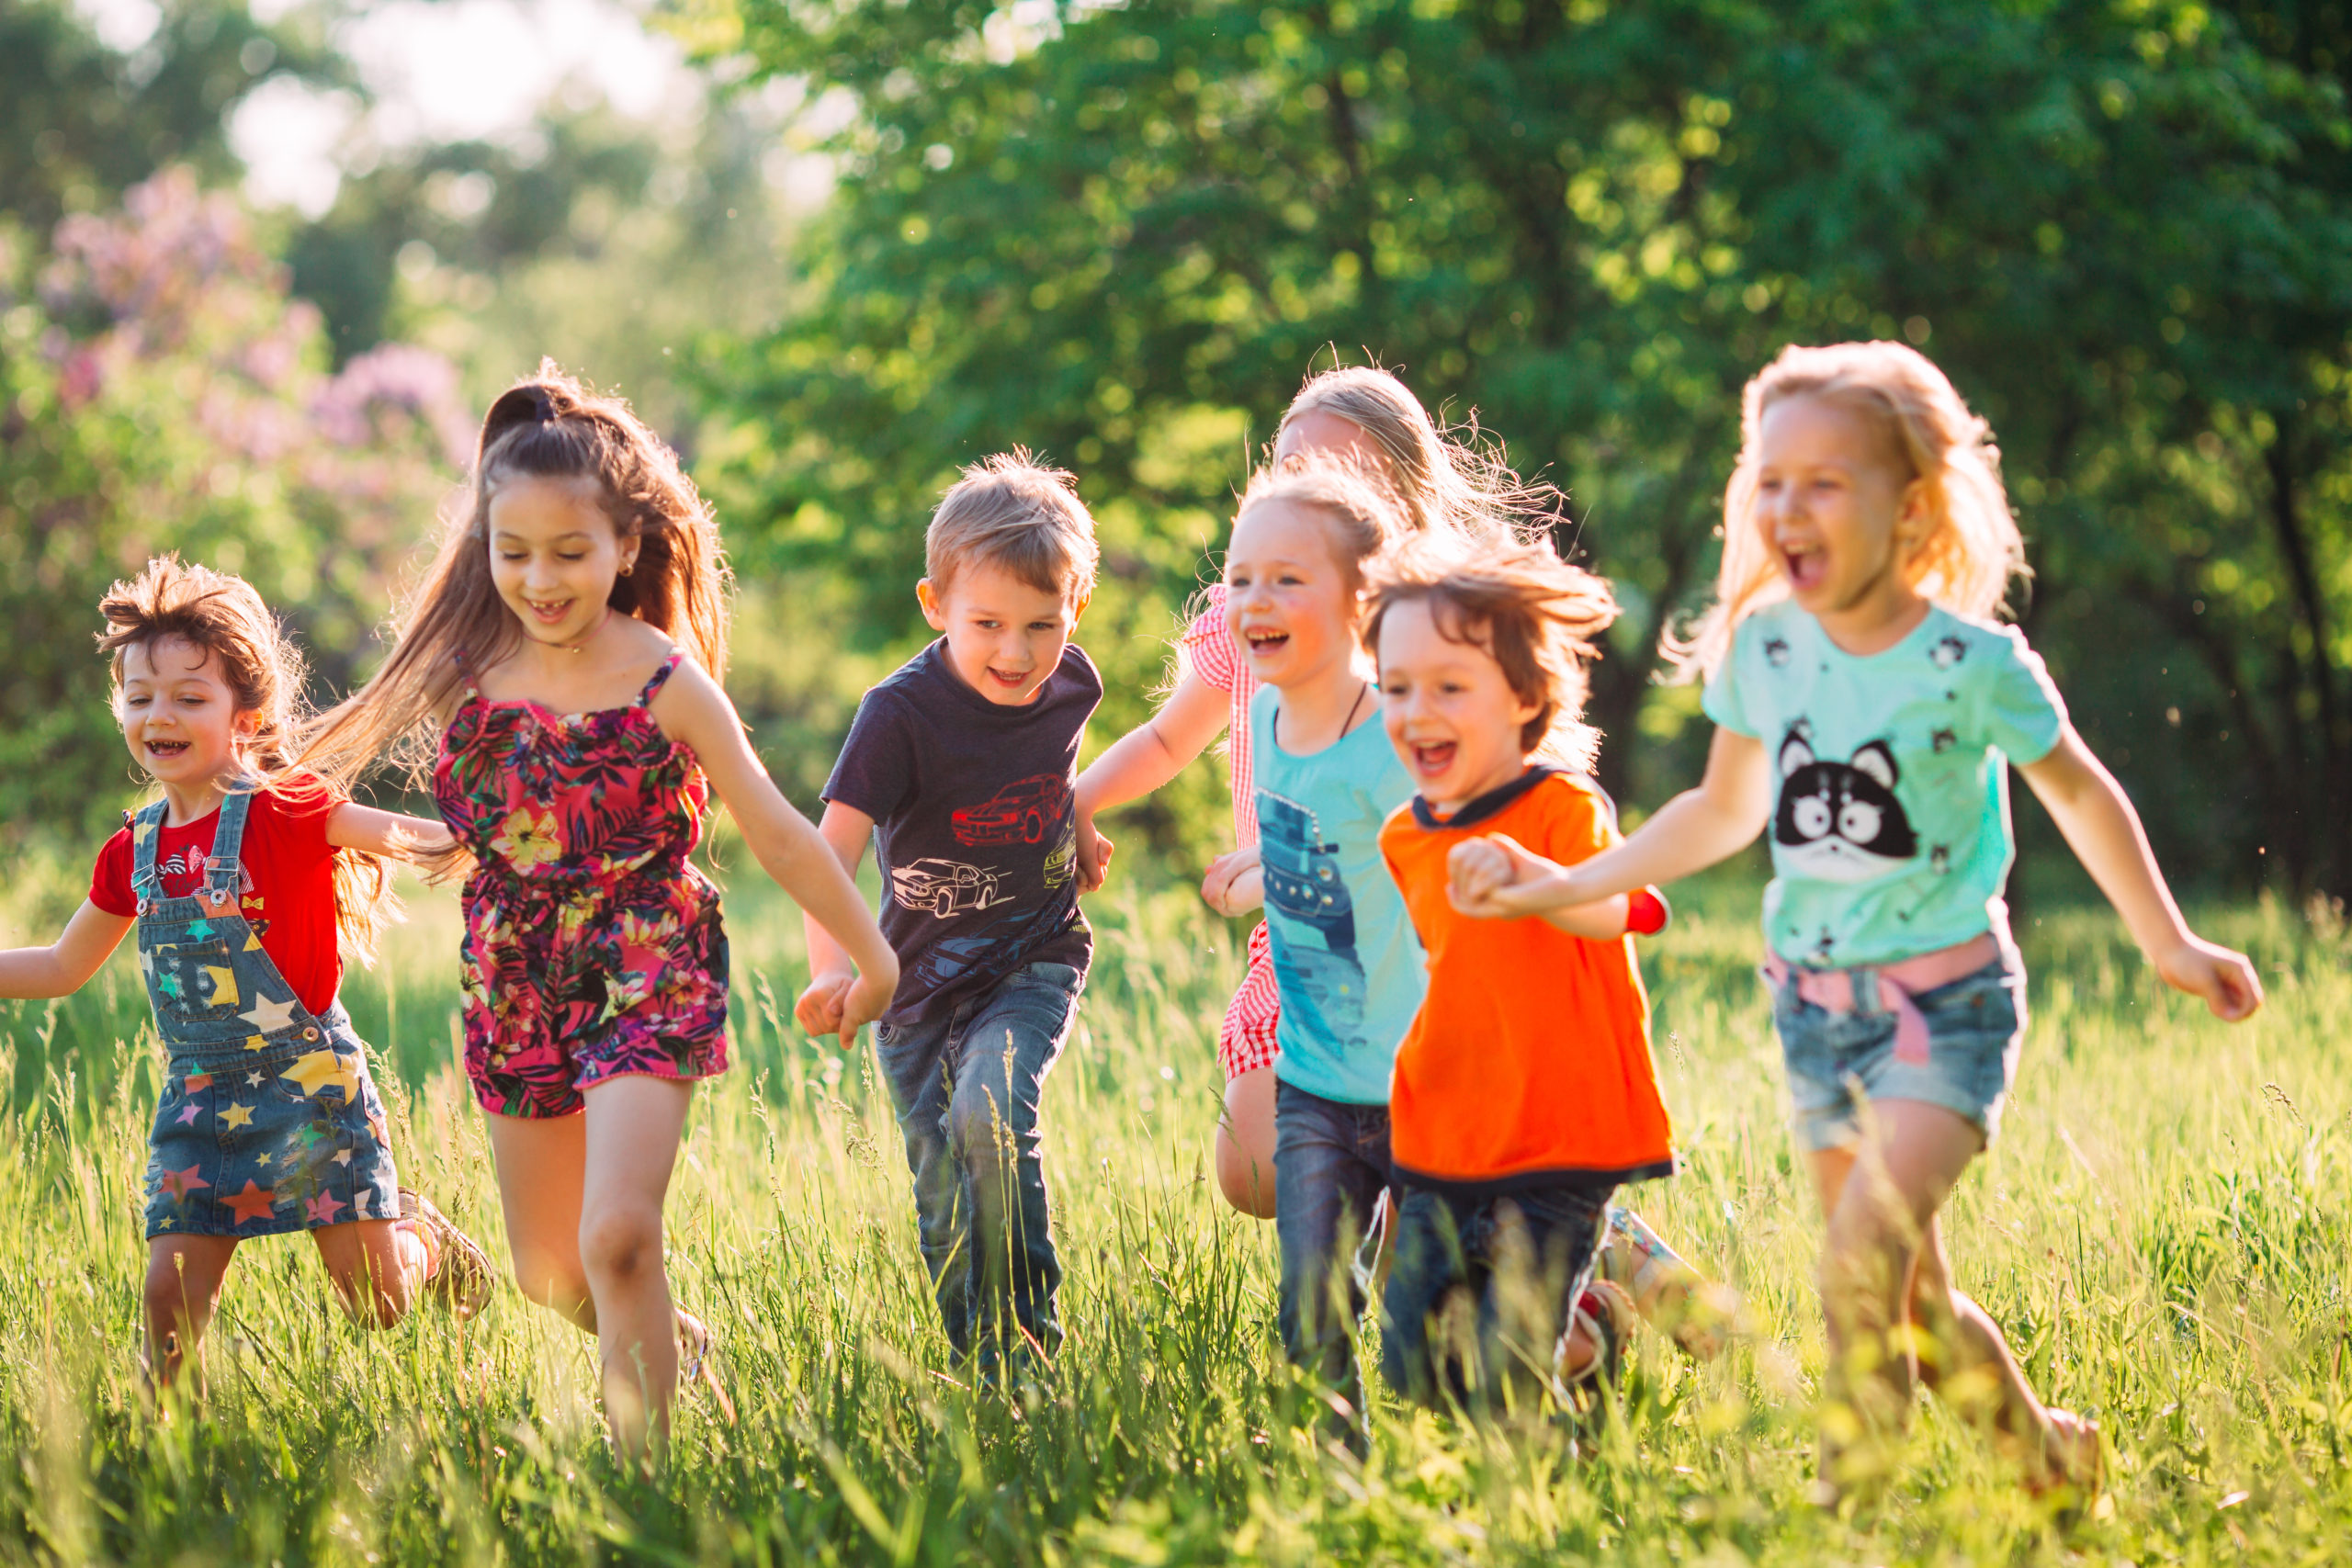 Large group of kids, friends boys and girls running in the park on sunny summer day in casual clothes